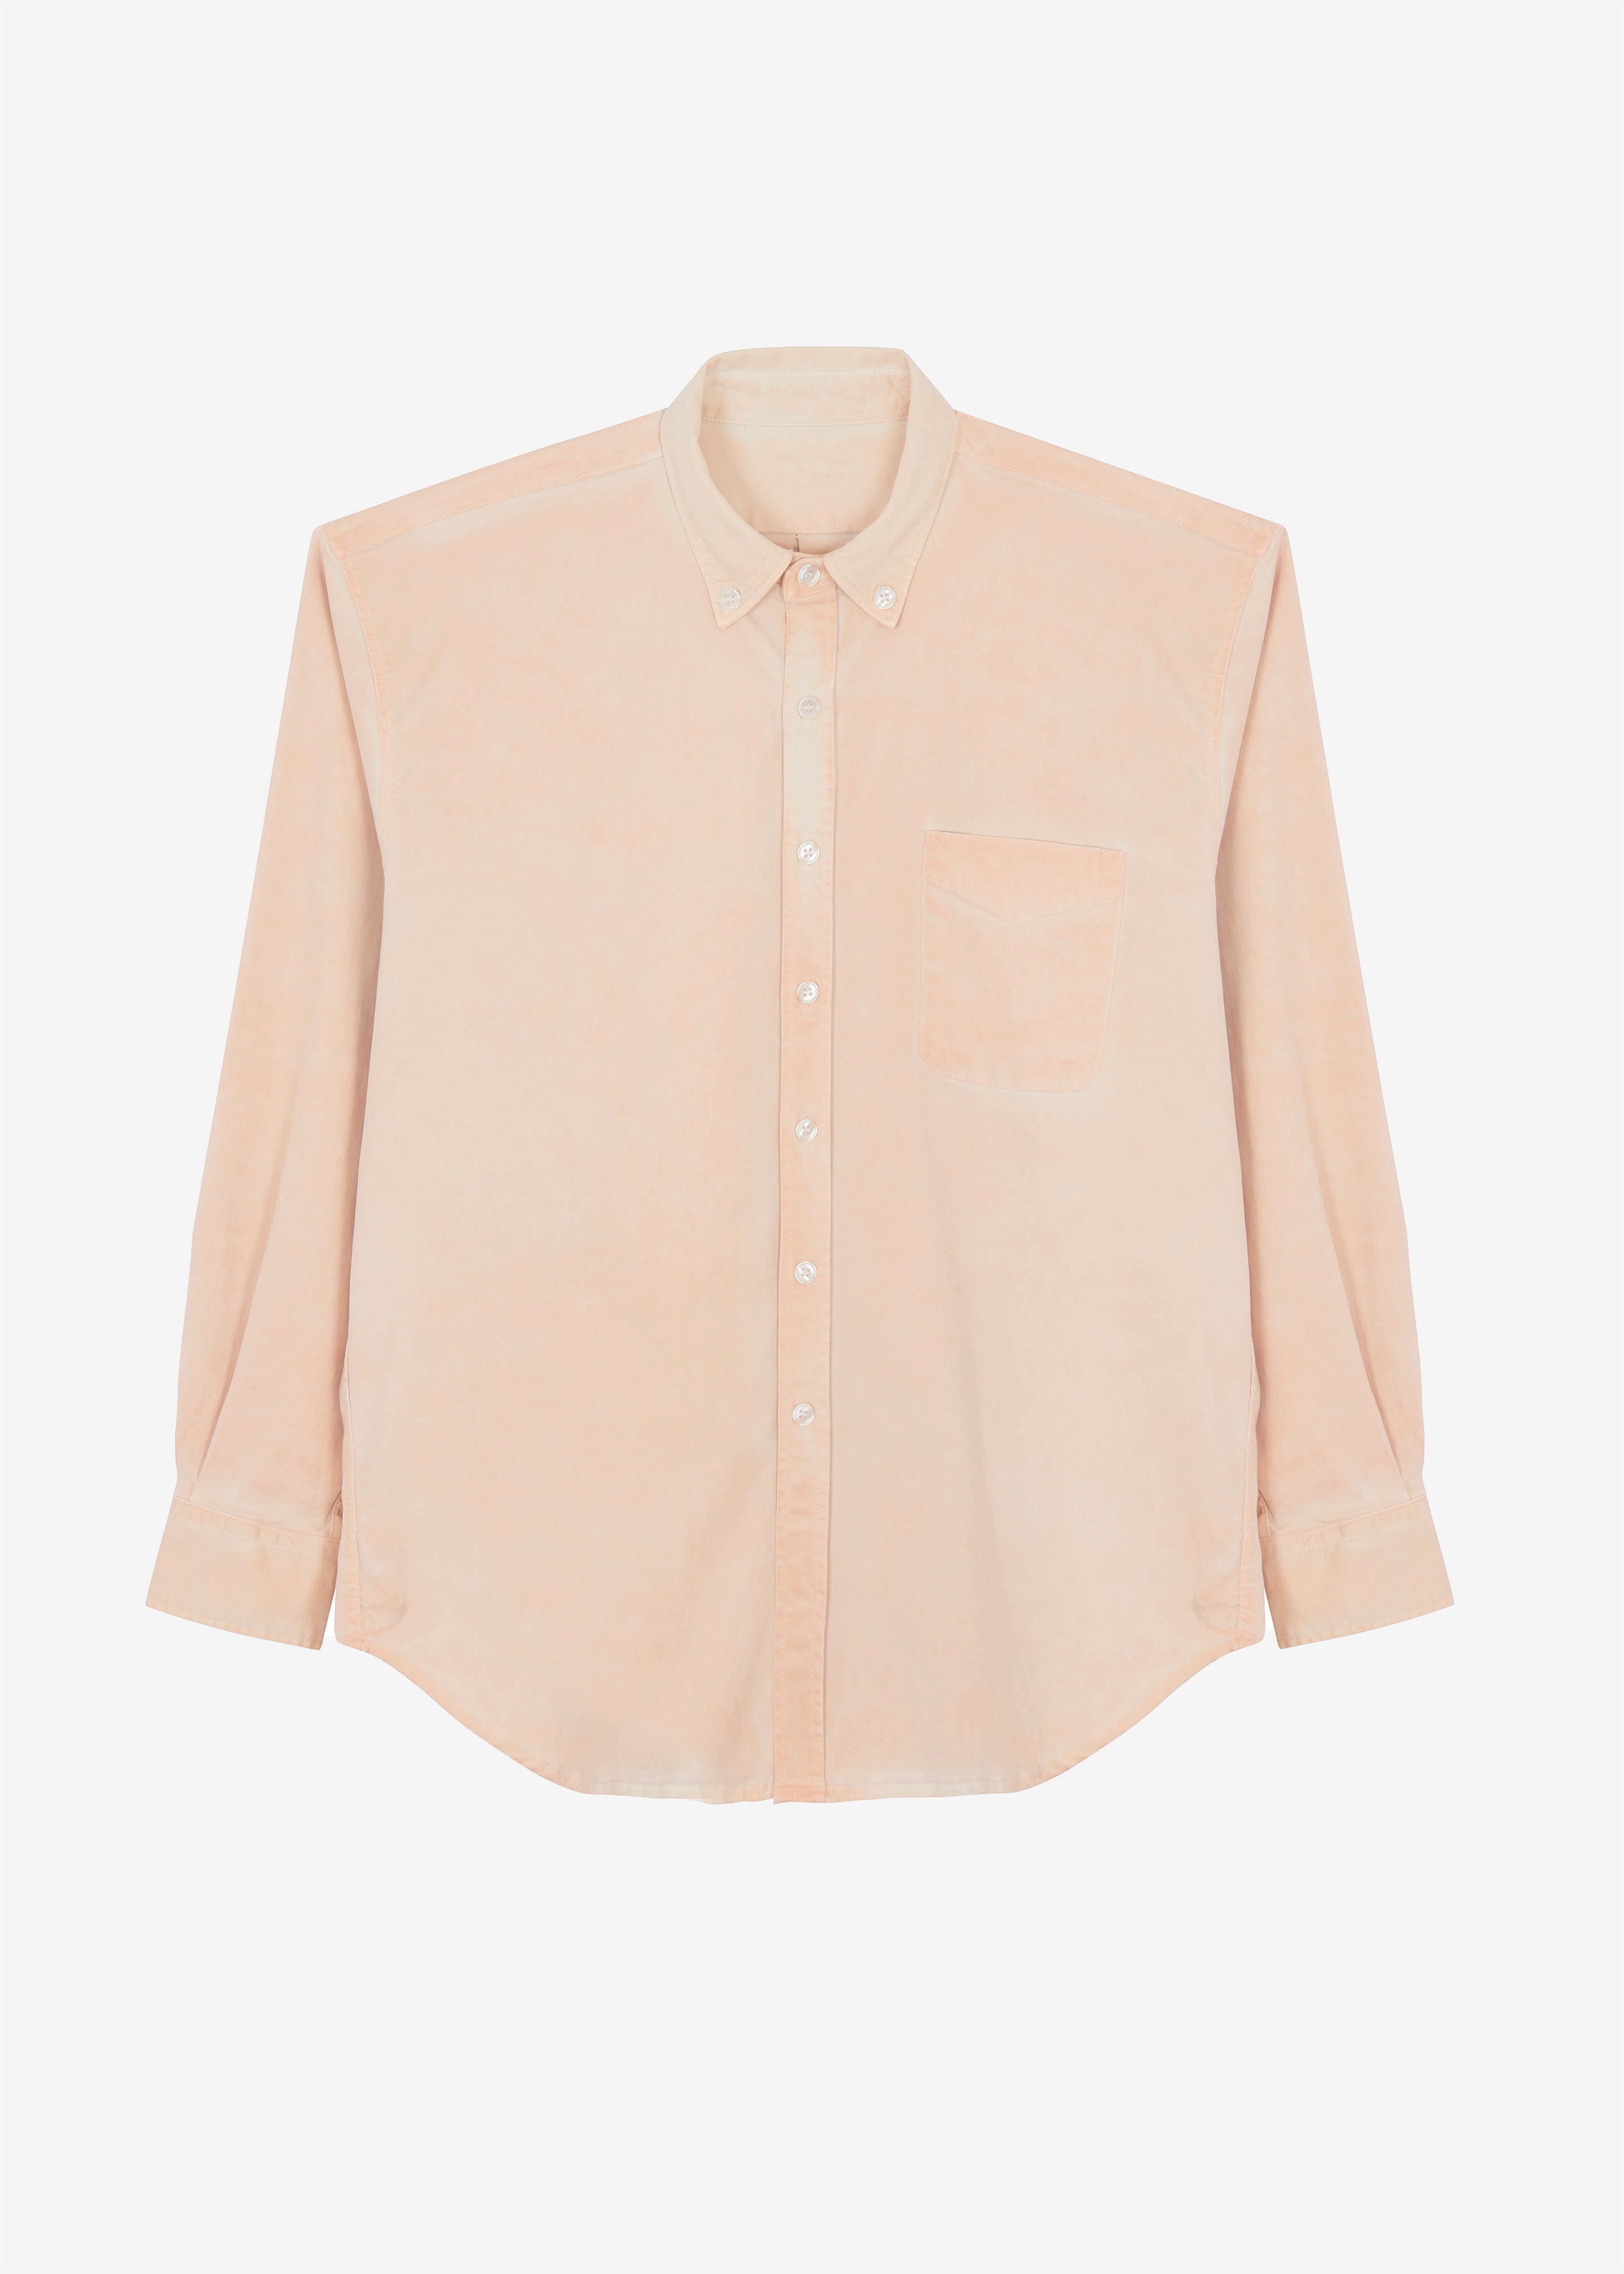 Sinclair Shirt - Faded Pink - 10